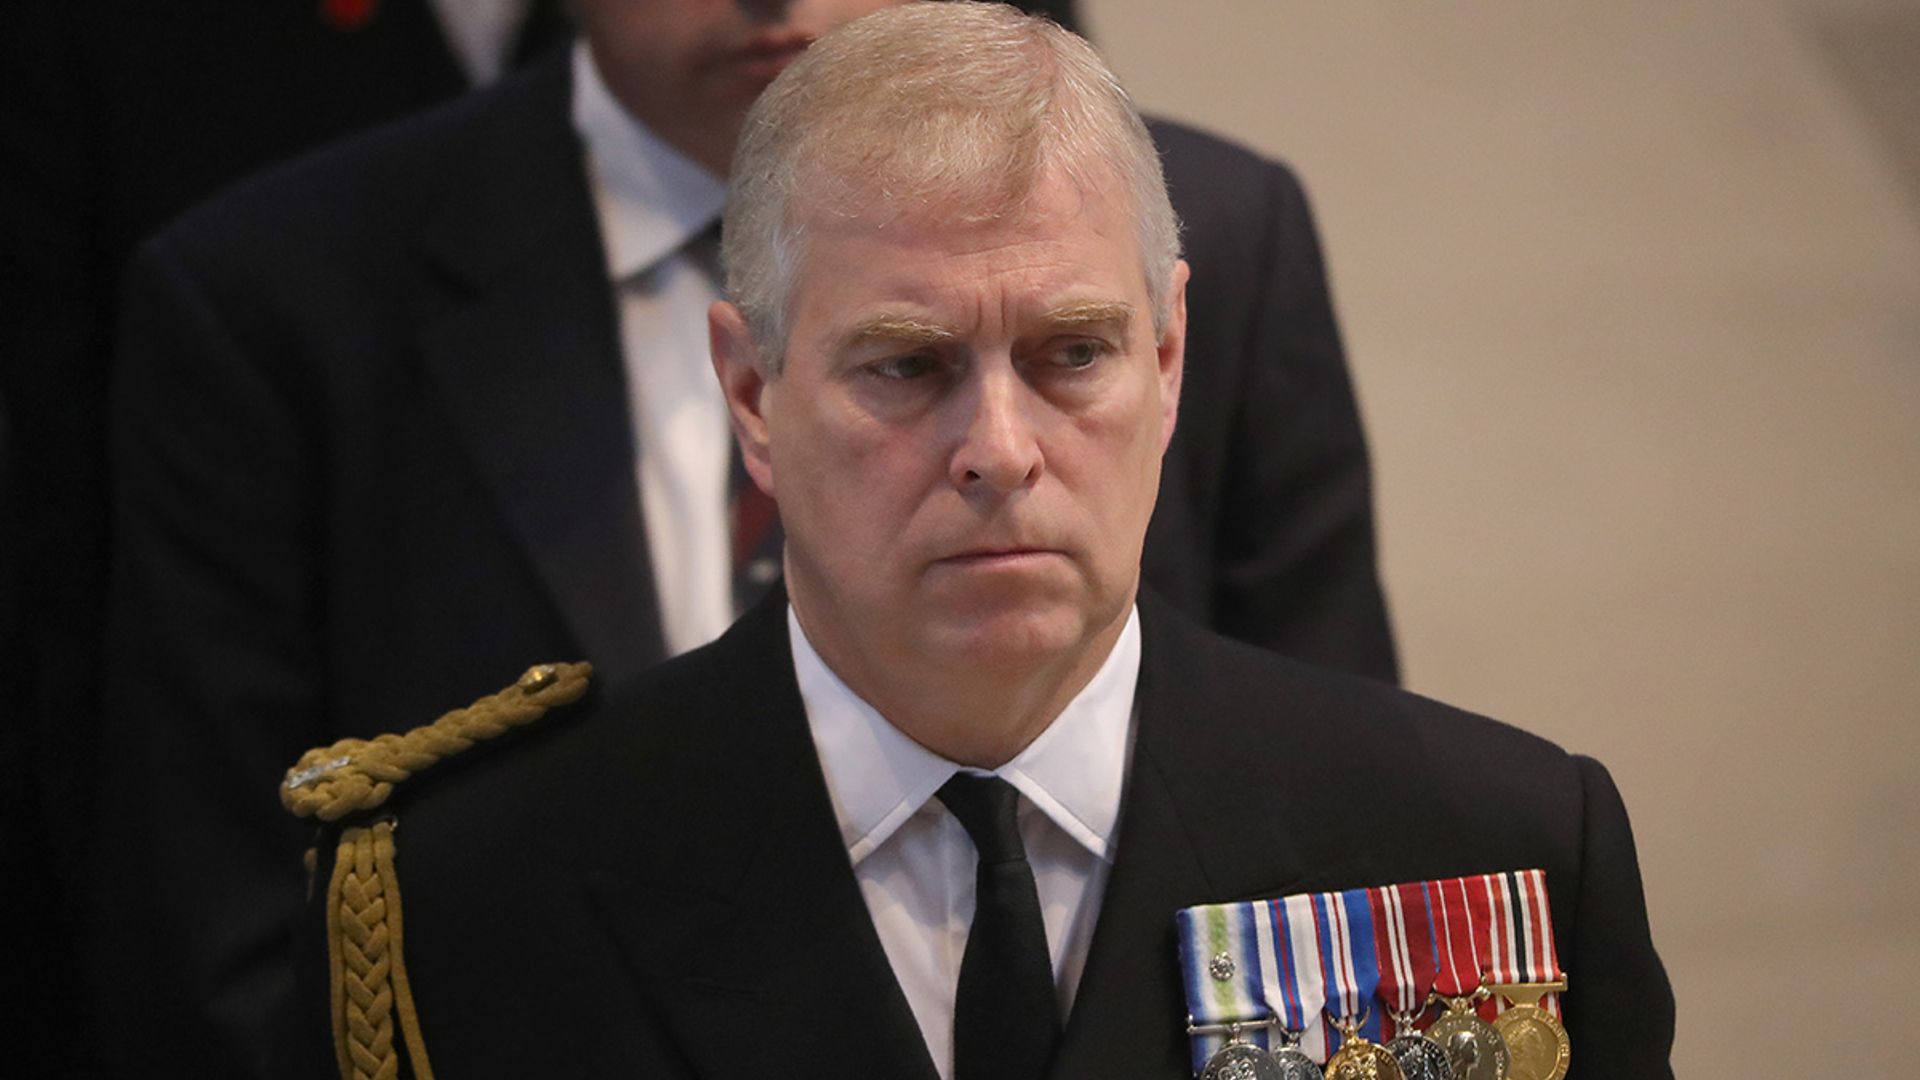 Prince Andrew's military affiliations and royal patronages handed back to the Queen amid court case